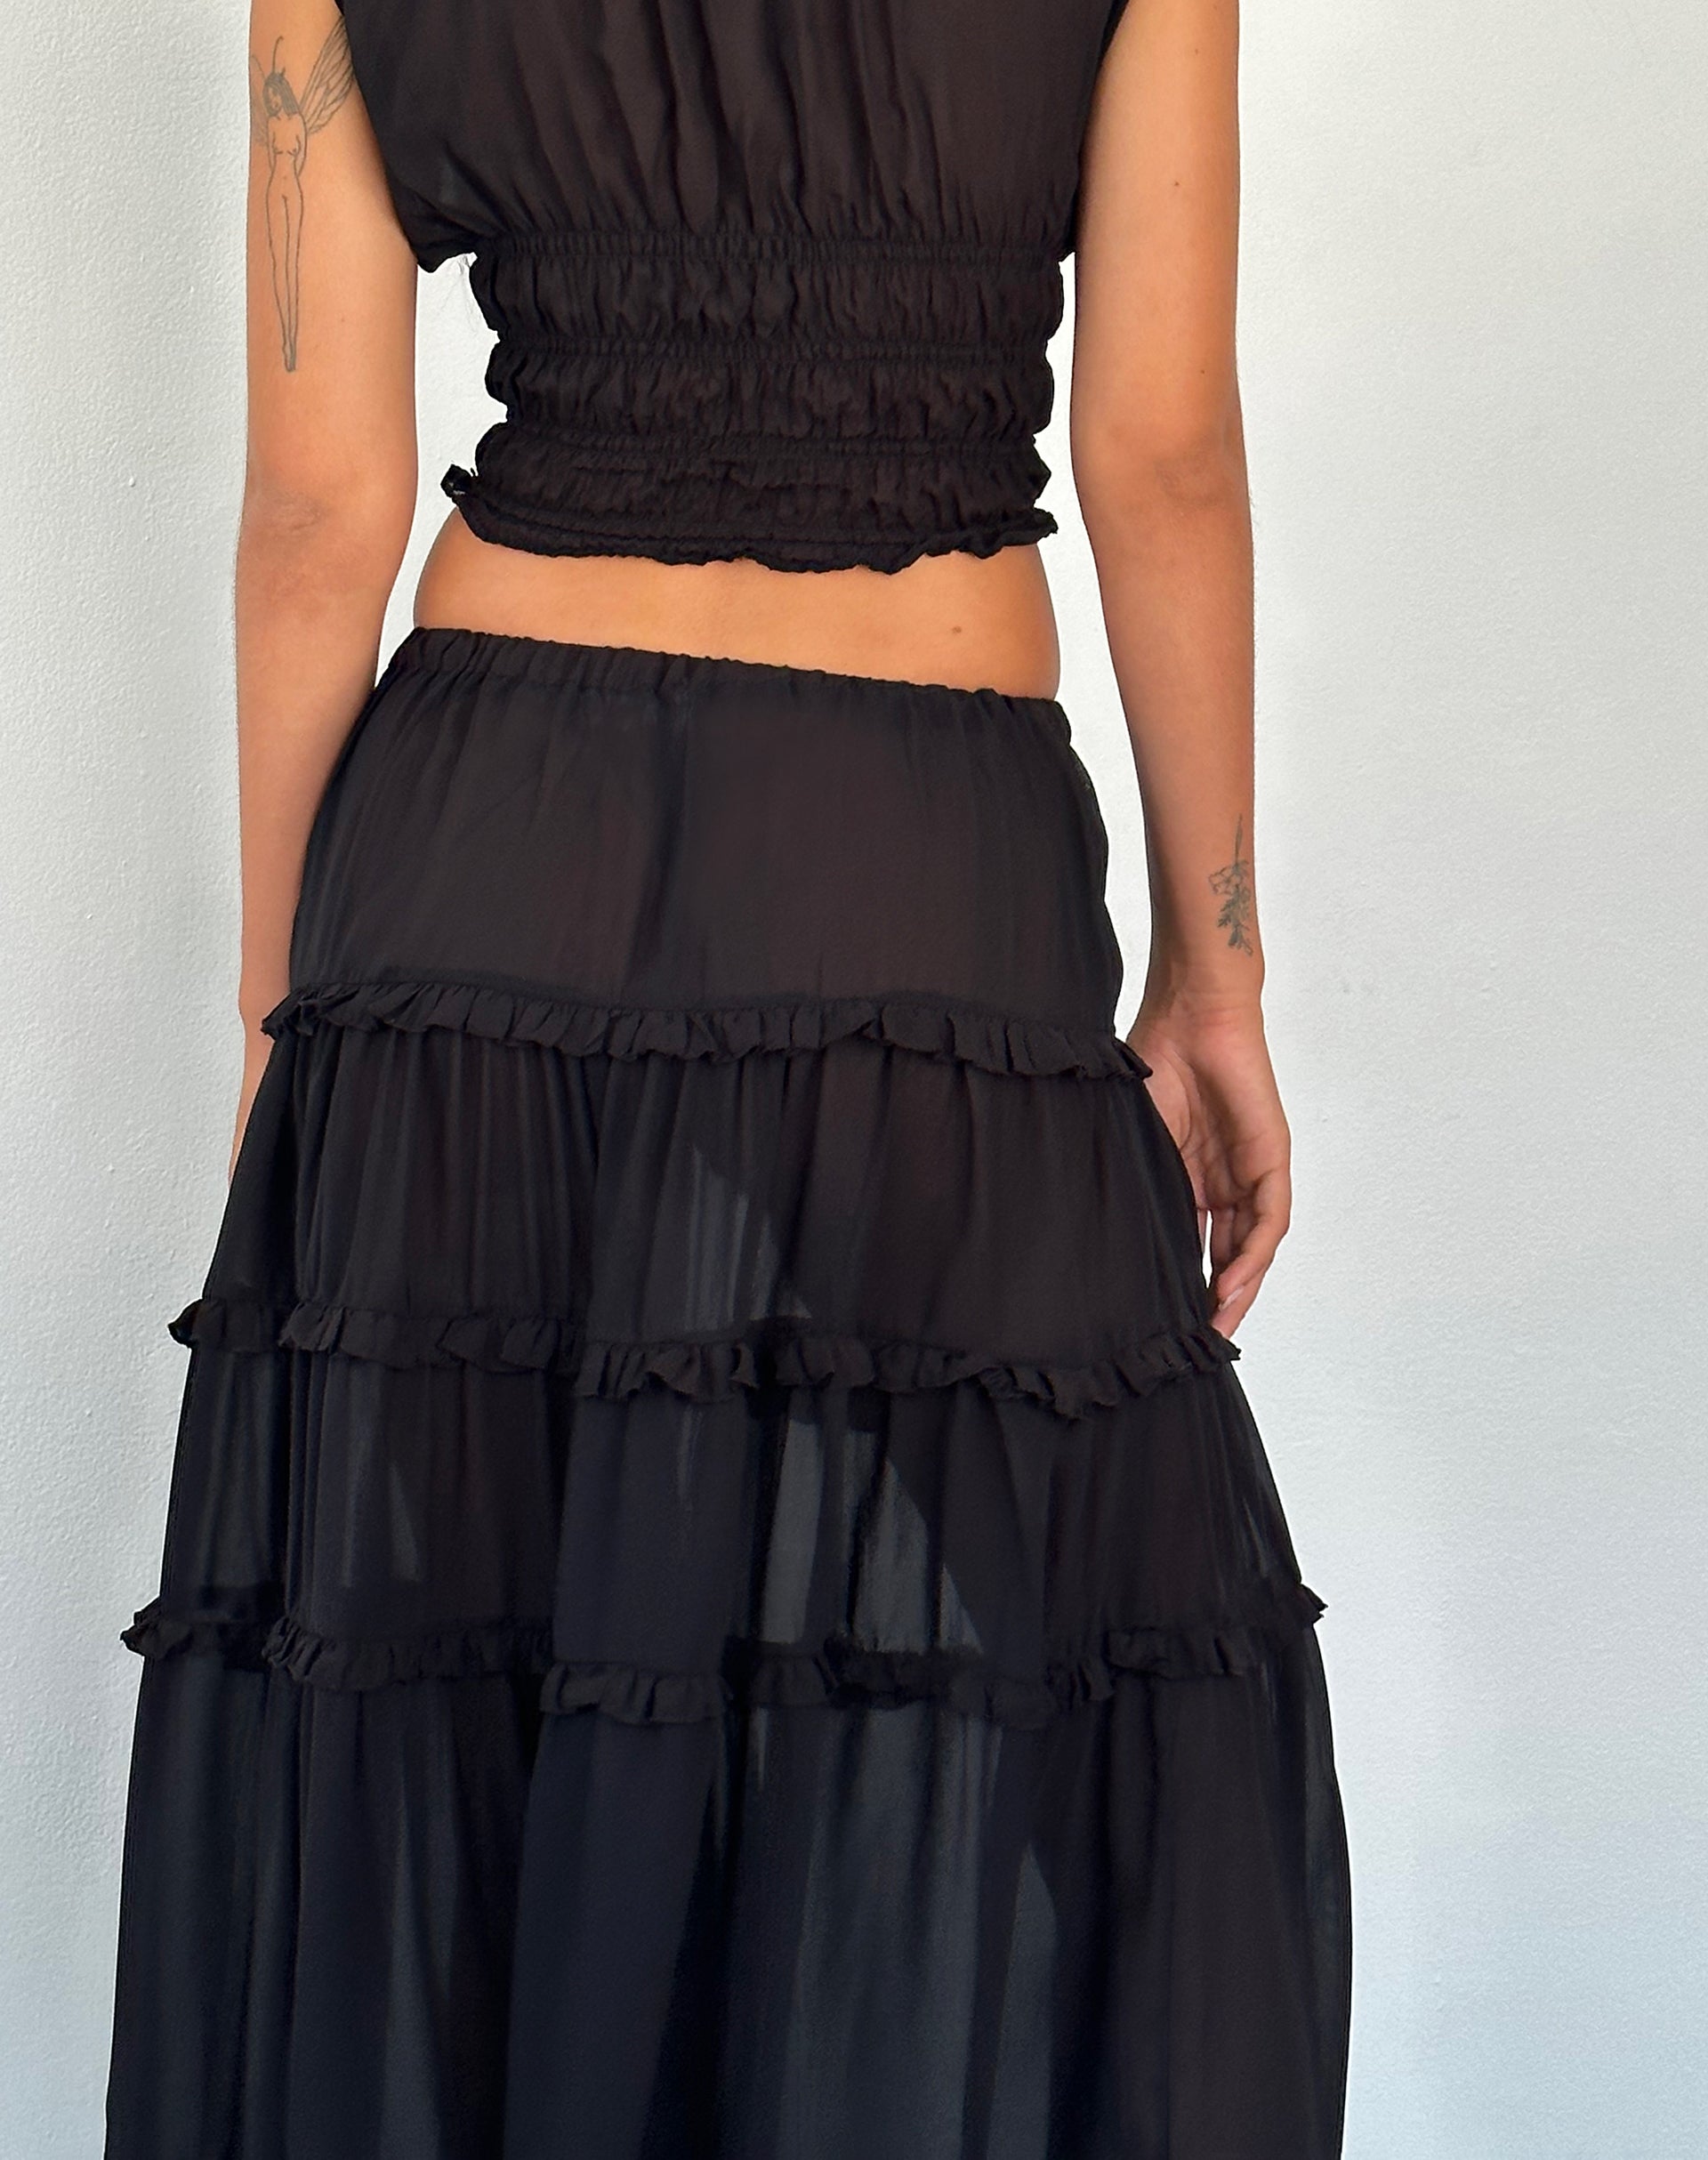 Image of Norah Tiered Maxi Skirt in Black Chiffon